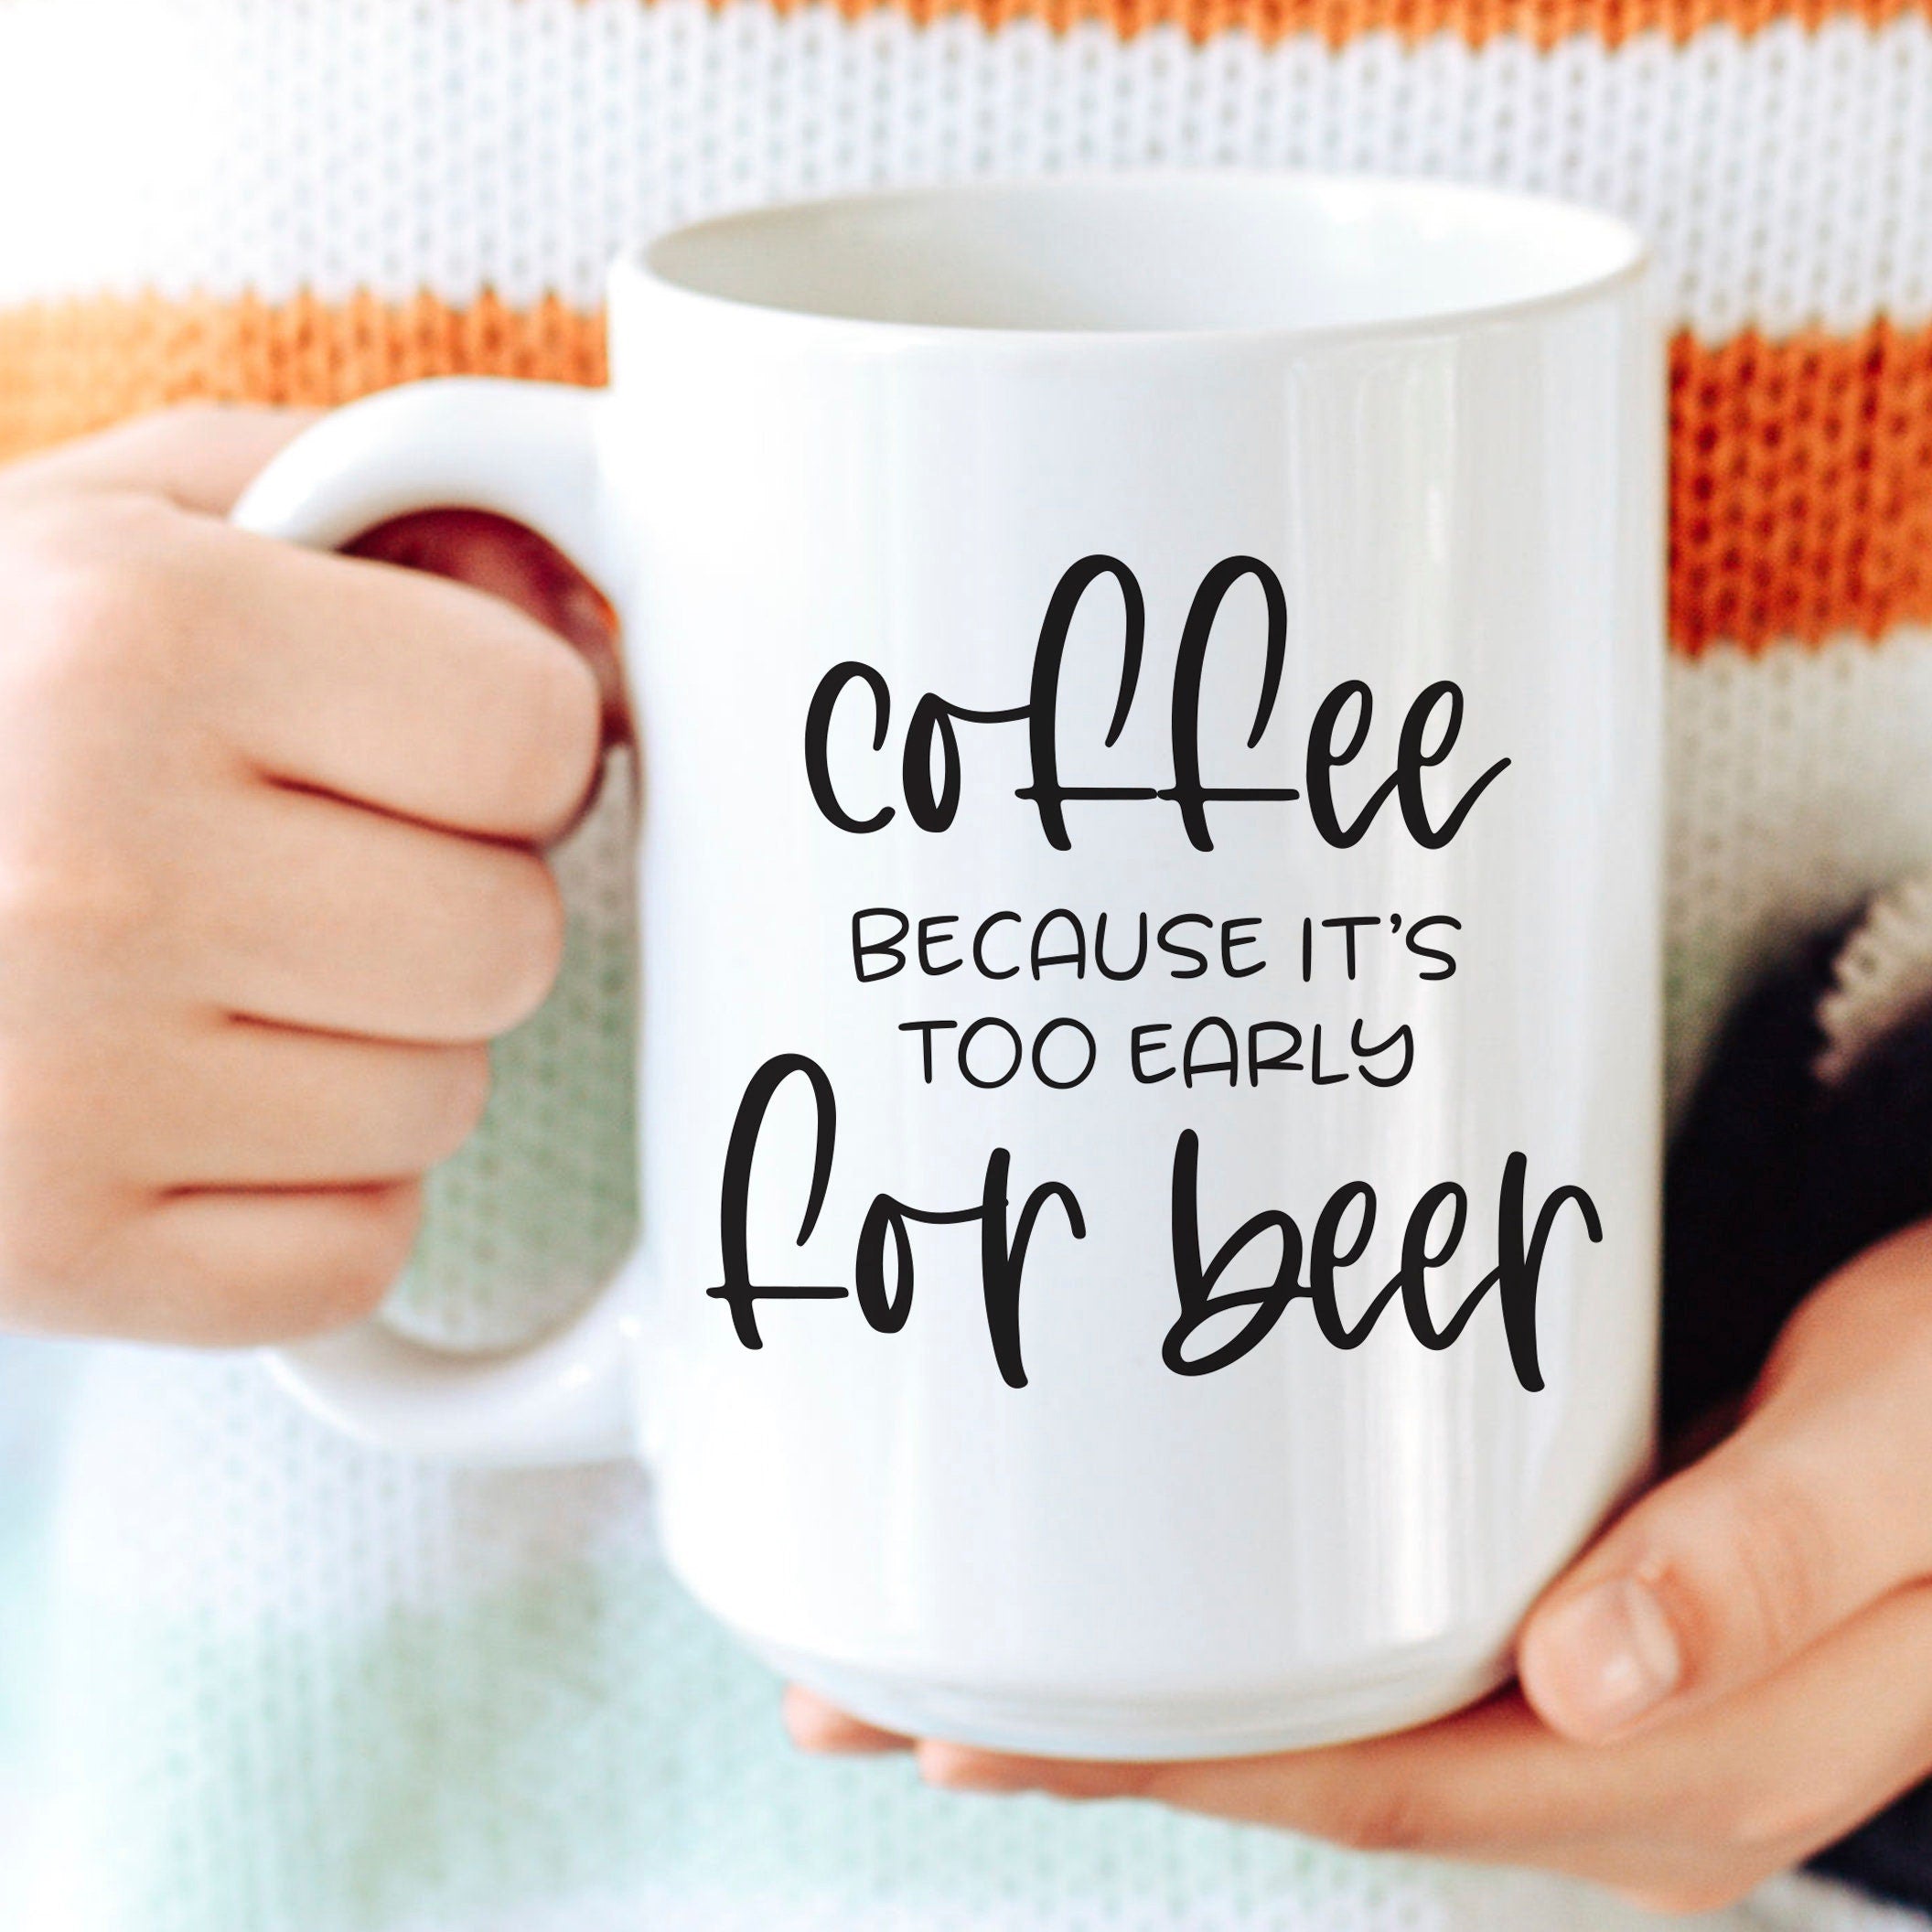 Funny Coffee Mug for Men, Valentines Gift for him, Beer Lovers